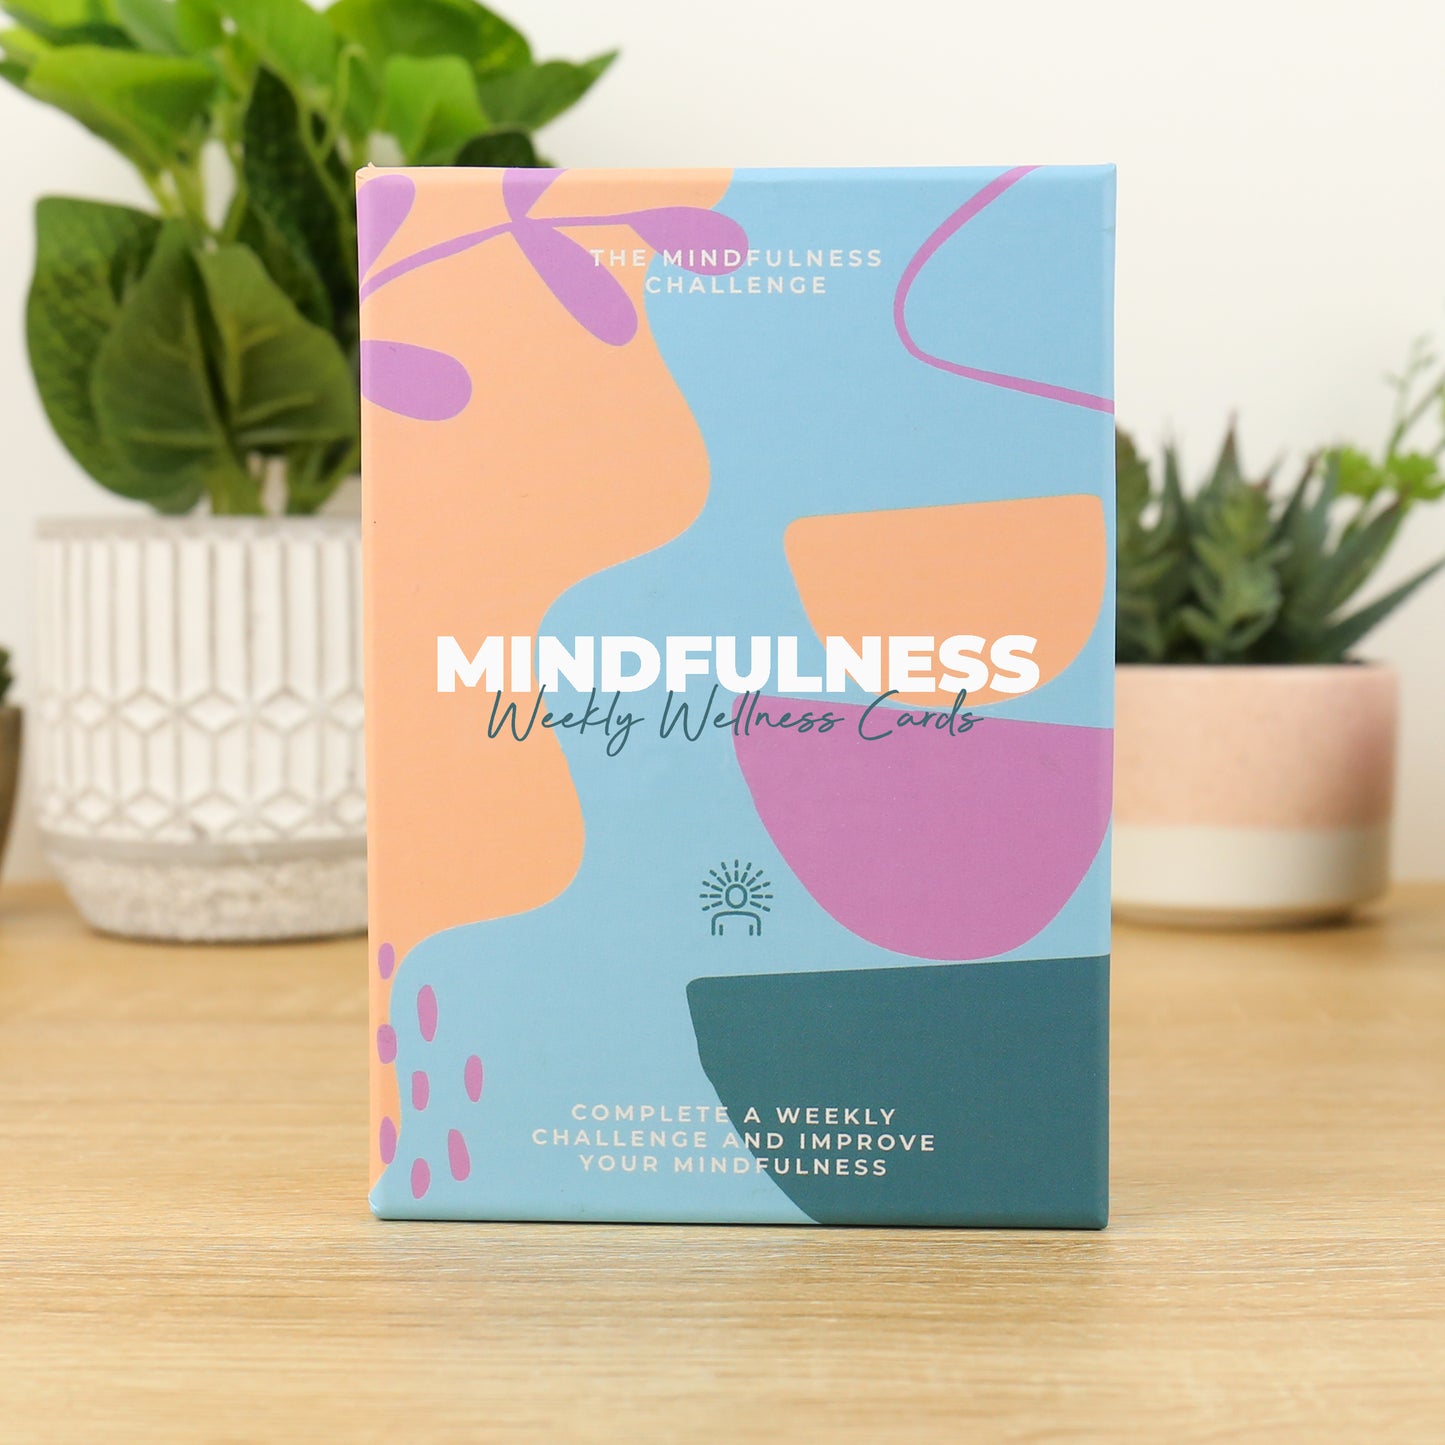 Weekly Wellness Cards Mindfulness - Gift Republic